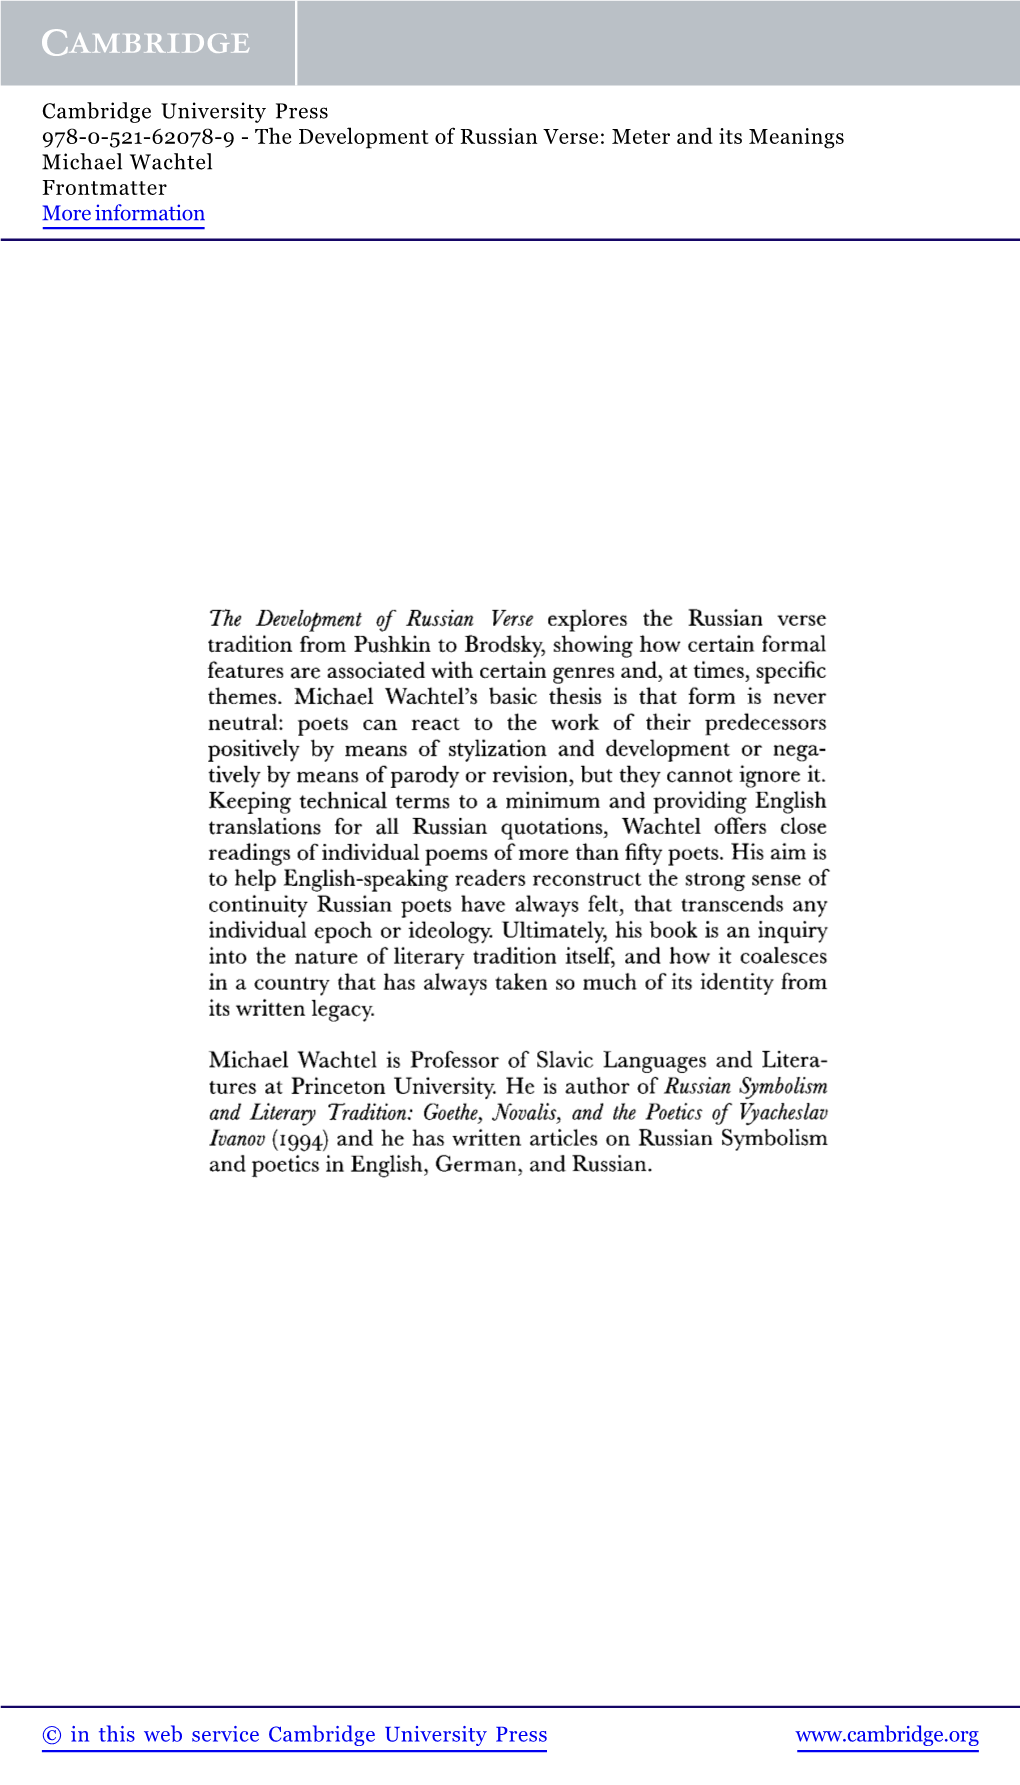 The Development of Russian Verse: Meter and Its Meanings Michael Wachtel Frontmatter More Information